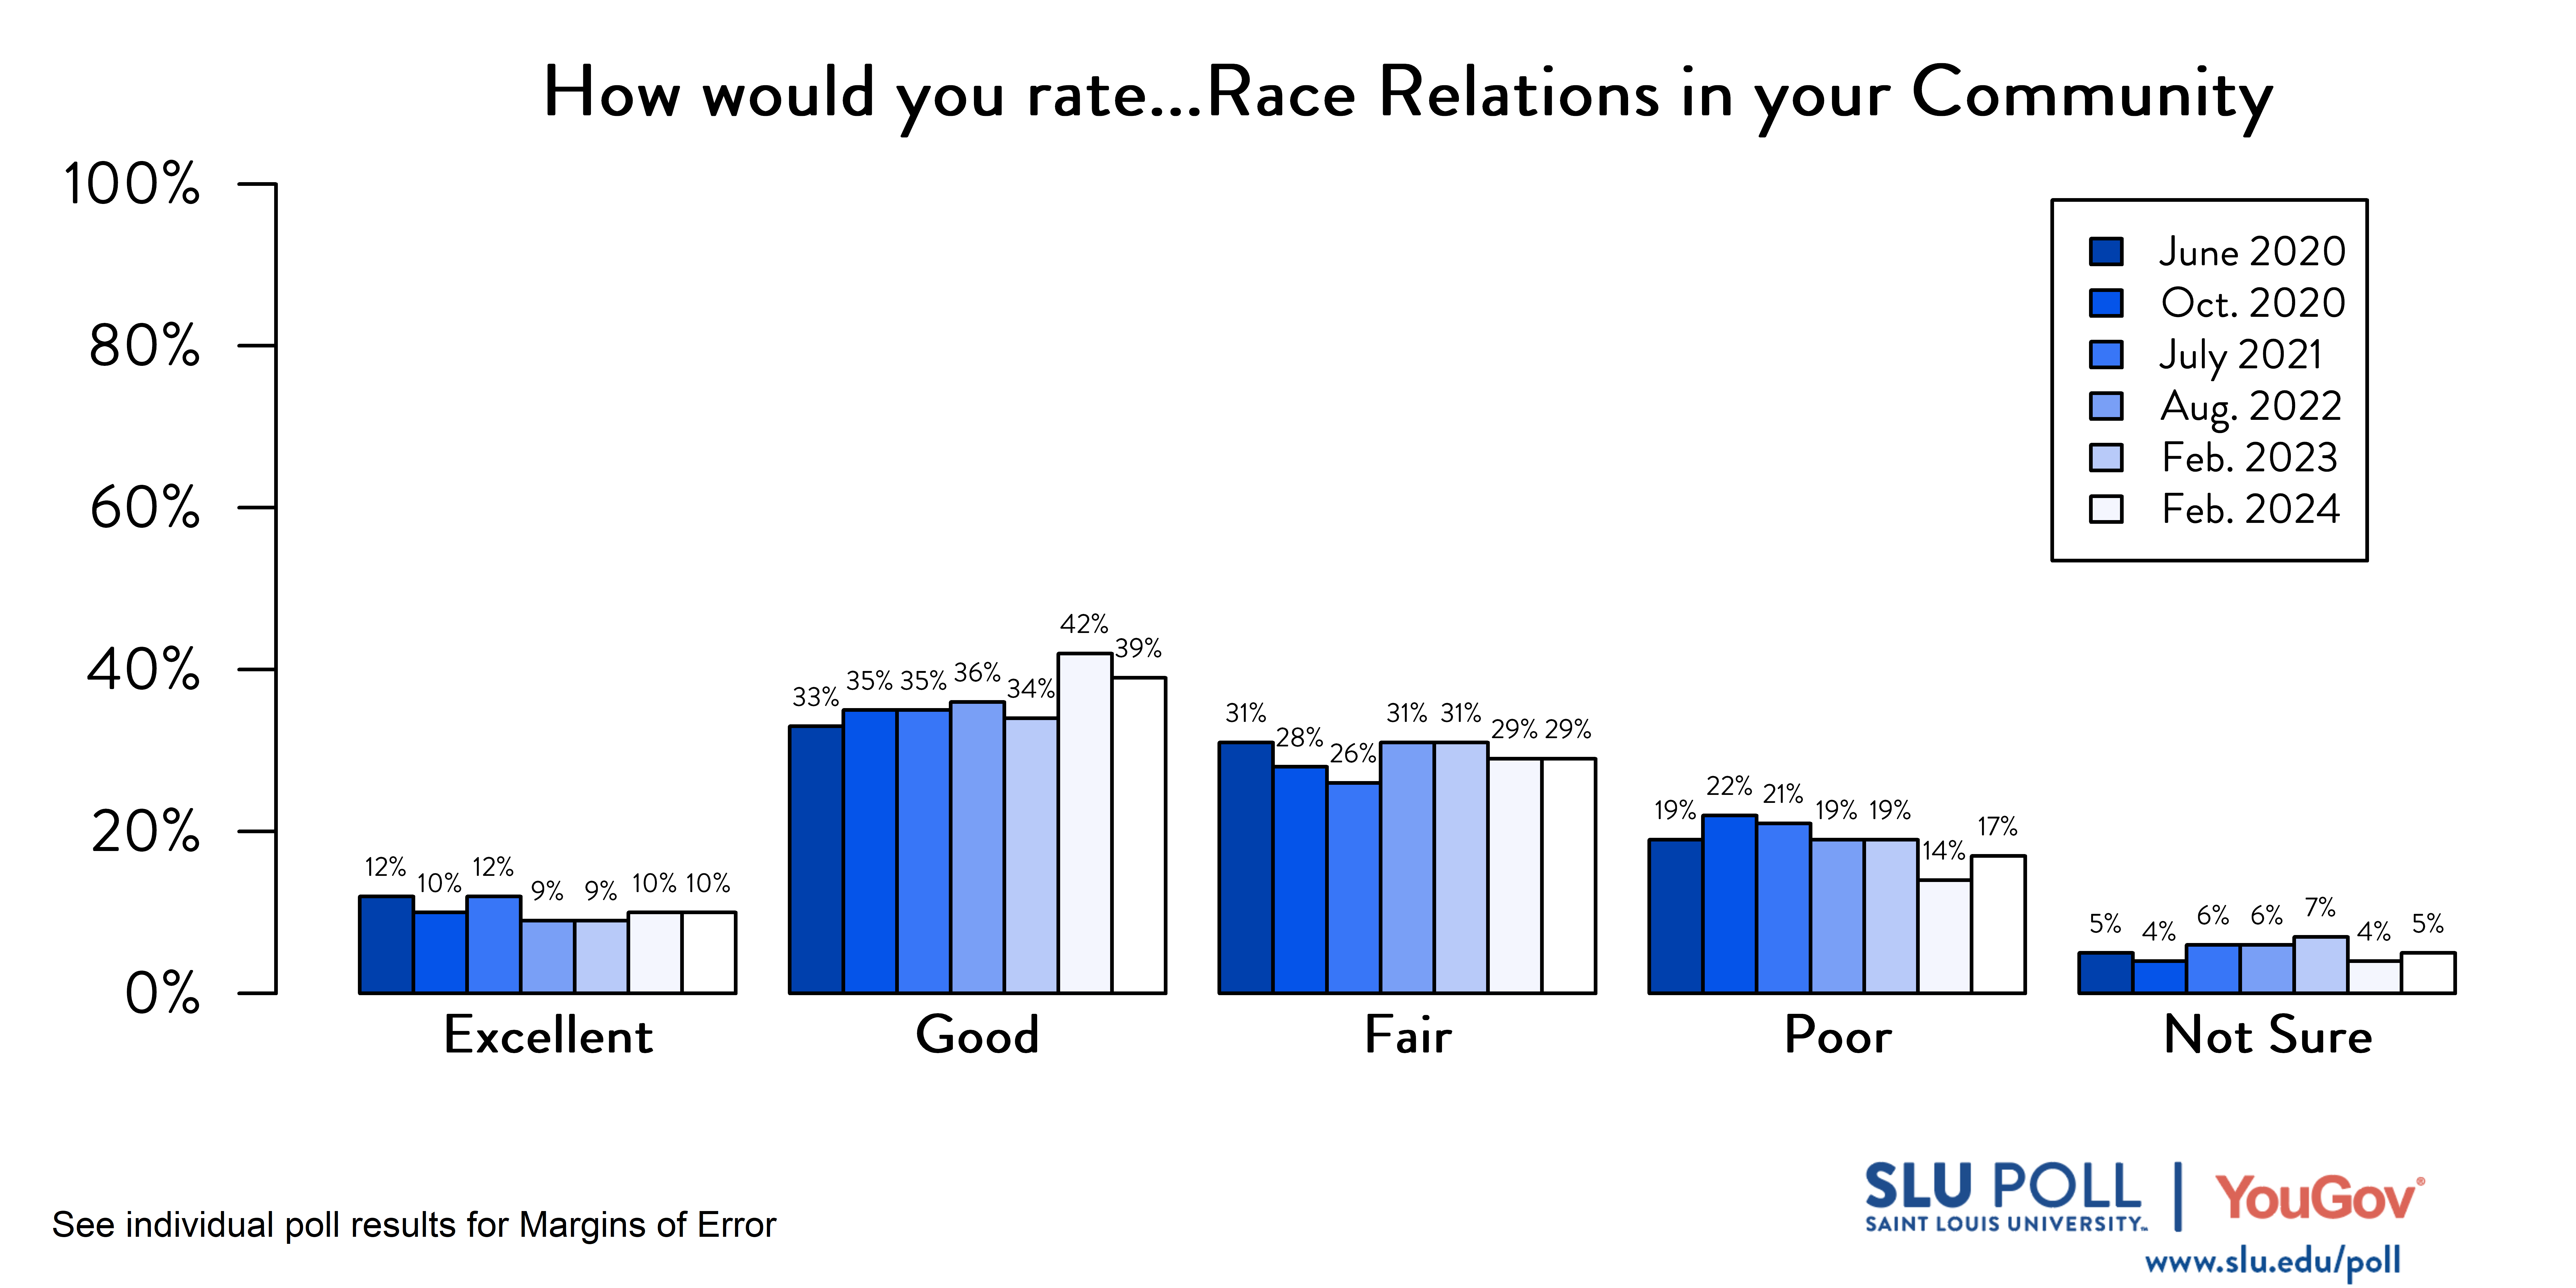 Likely voters' responses to 'How would you rate the condition of the following…Race relations in your community?'. June 2020 Voter Responses 12% Excellent, 33% Good, 31% Fair, 19% Poor, and 5% Not Sure. October 2020 Voter Responses: 10% Excellent, 35% Good, 28% Fair, 22% Poor, and 4% Not sure. July 2021 Voter Responses: 12% Excellent, 35% Good, 26% Fair, 21% Poor, and 6% Not sure. August 2022 Voter Responses: 9% Excellent, 36% Good, 31% Fair, 19% Poor, and 6% Not sure. February 2023 Voter Responses: 9% Excellent, 34% Good, 31% Fair, 19% Poor, and 7% Not sure. February 2024 Voter Responses: 8% Excellent, 31% Good, 30% Fair, 29% Poor, and 2% Not sure.